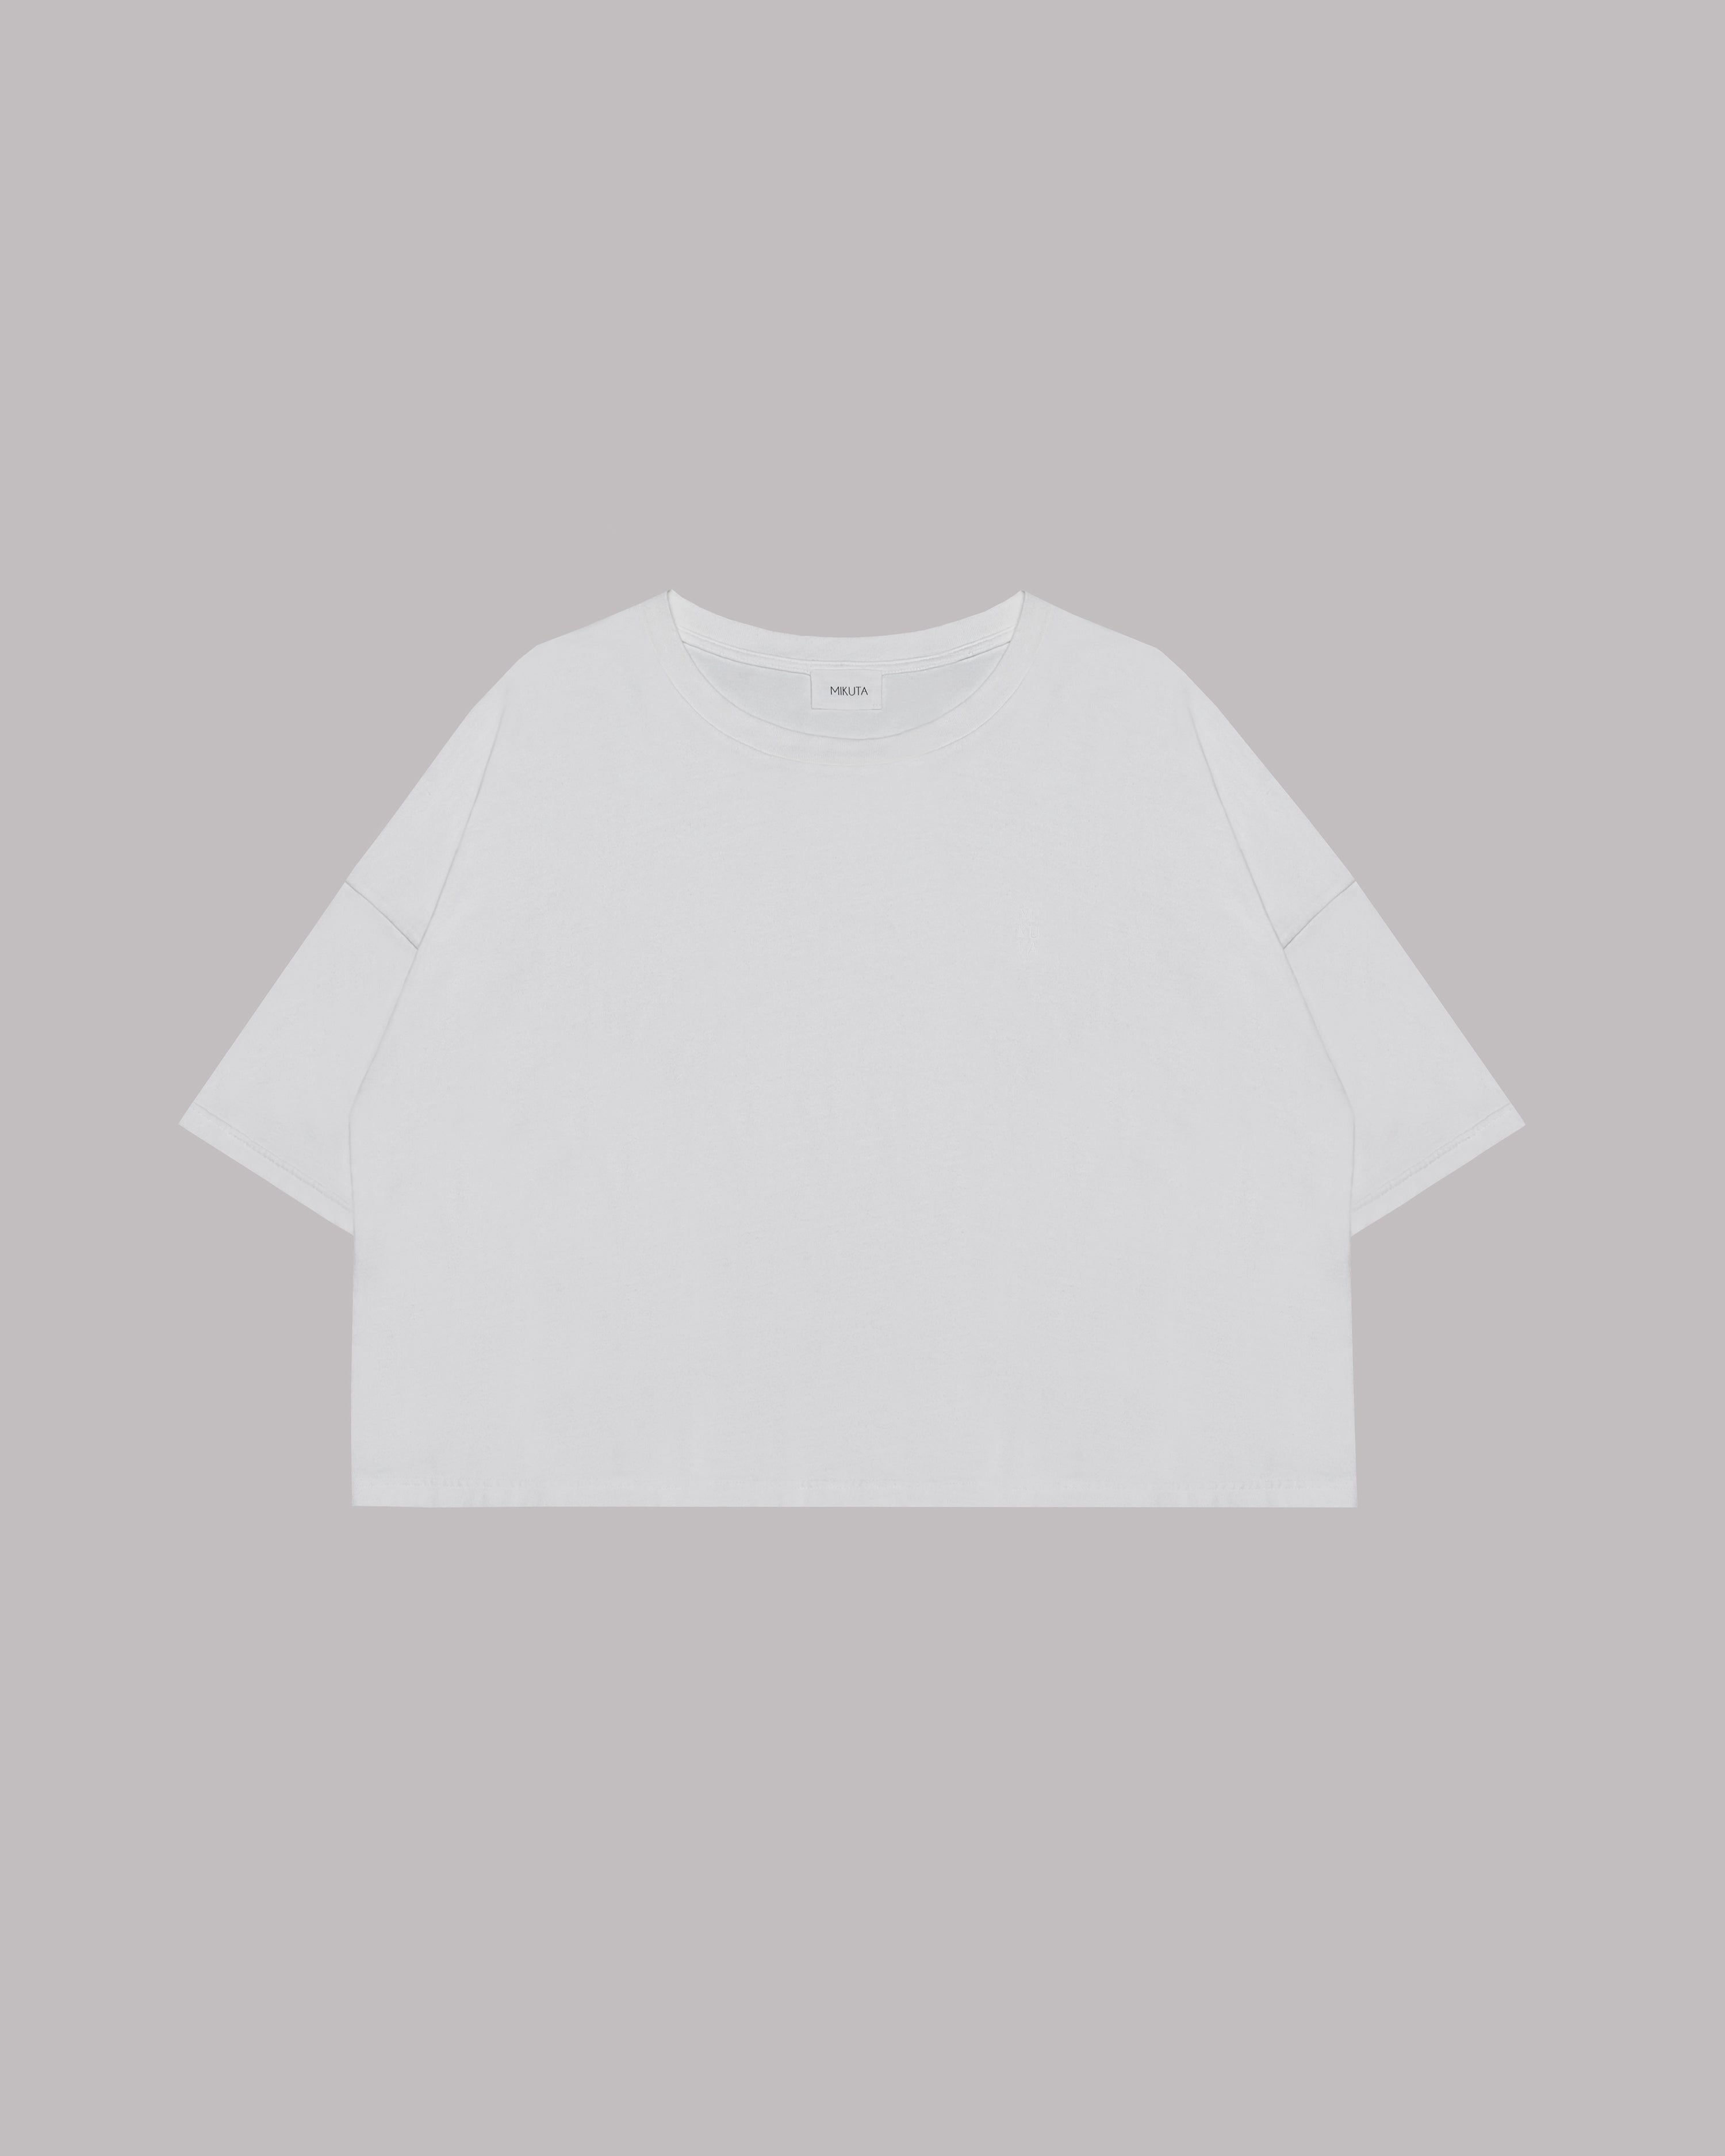 The White Loose Cotton T-Shirt